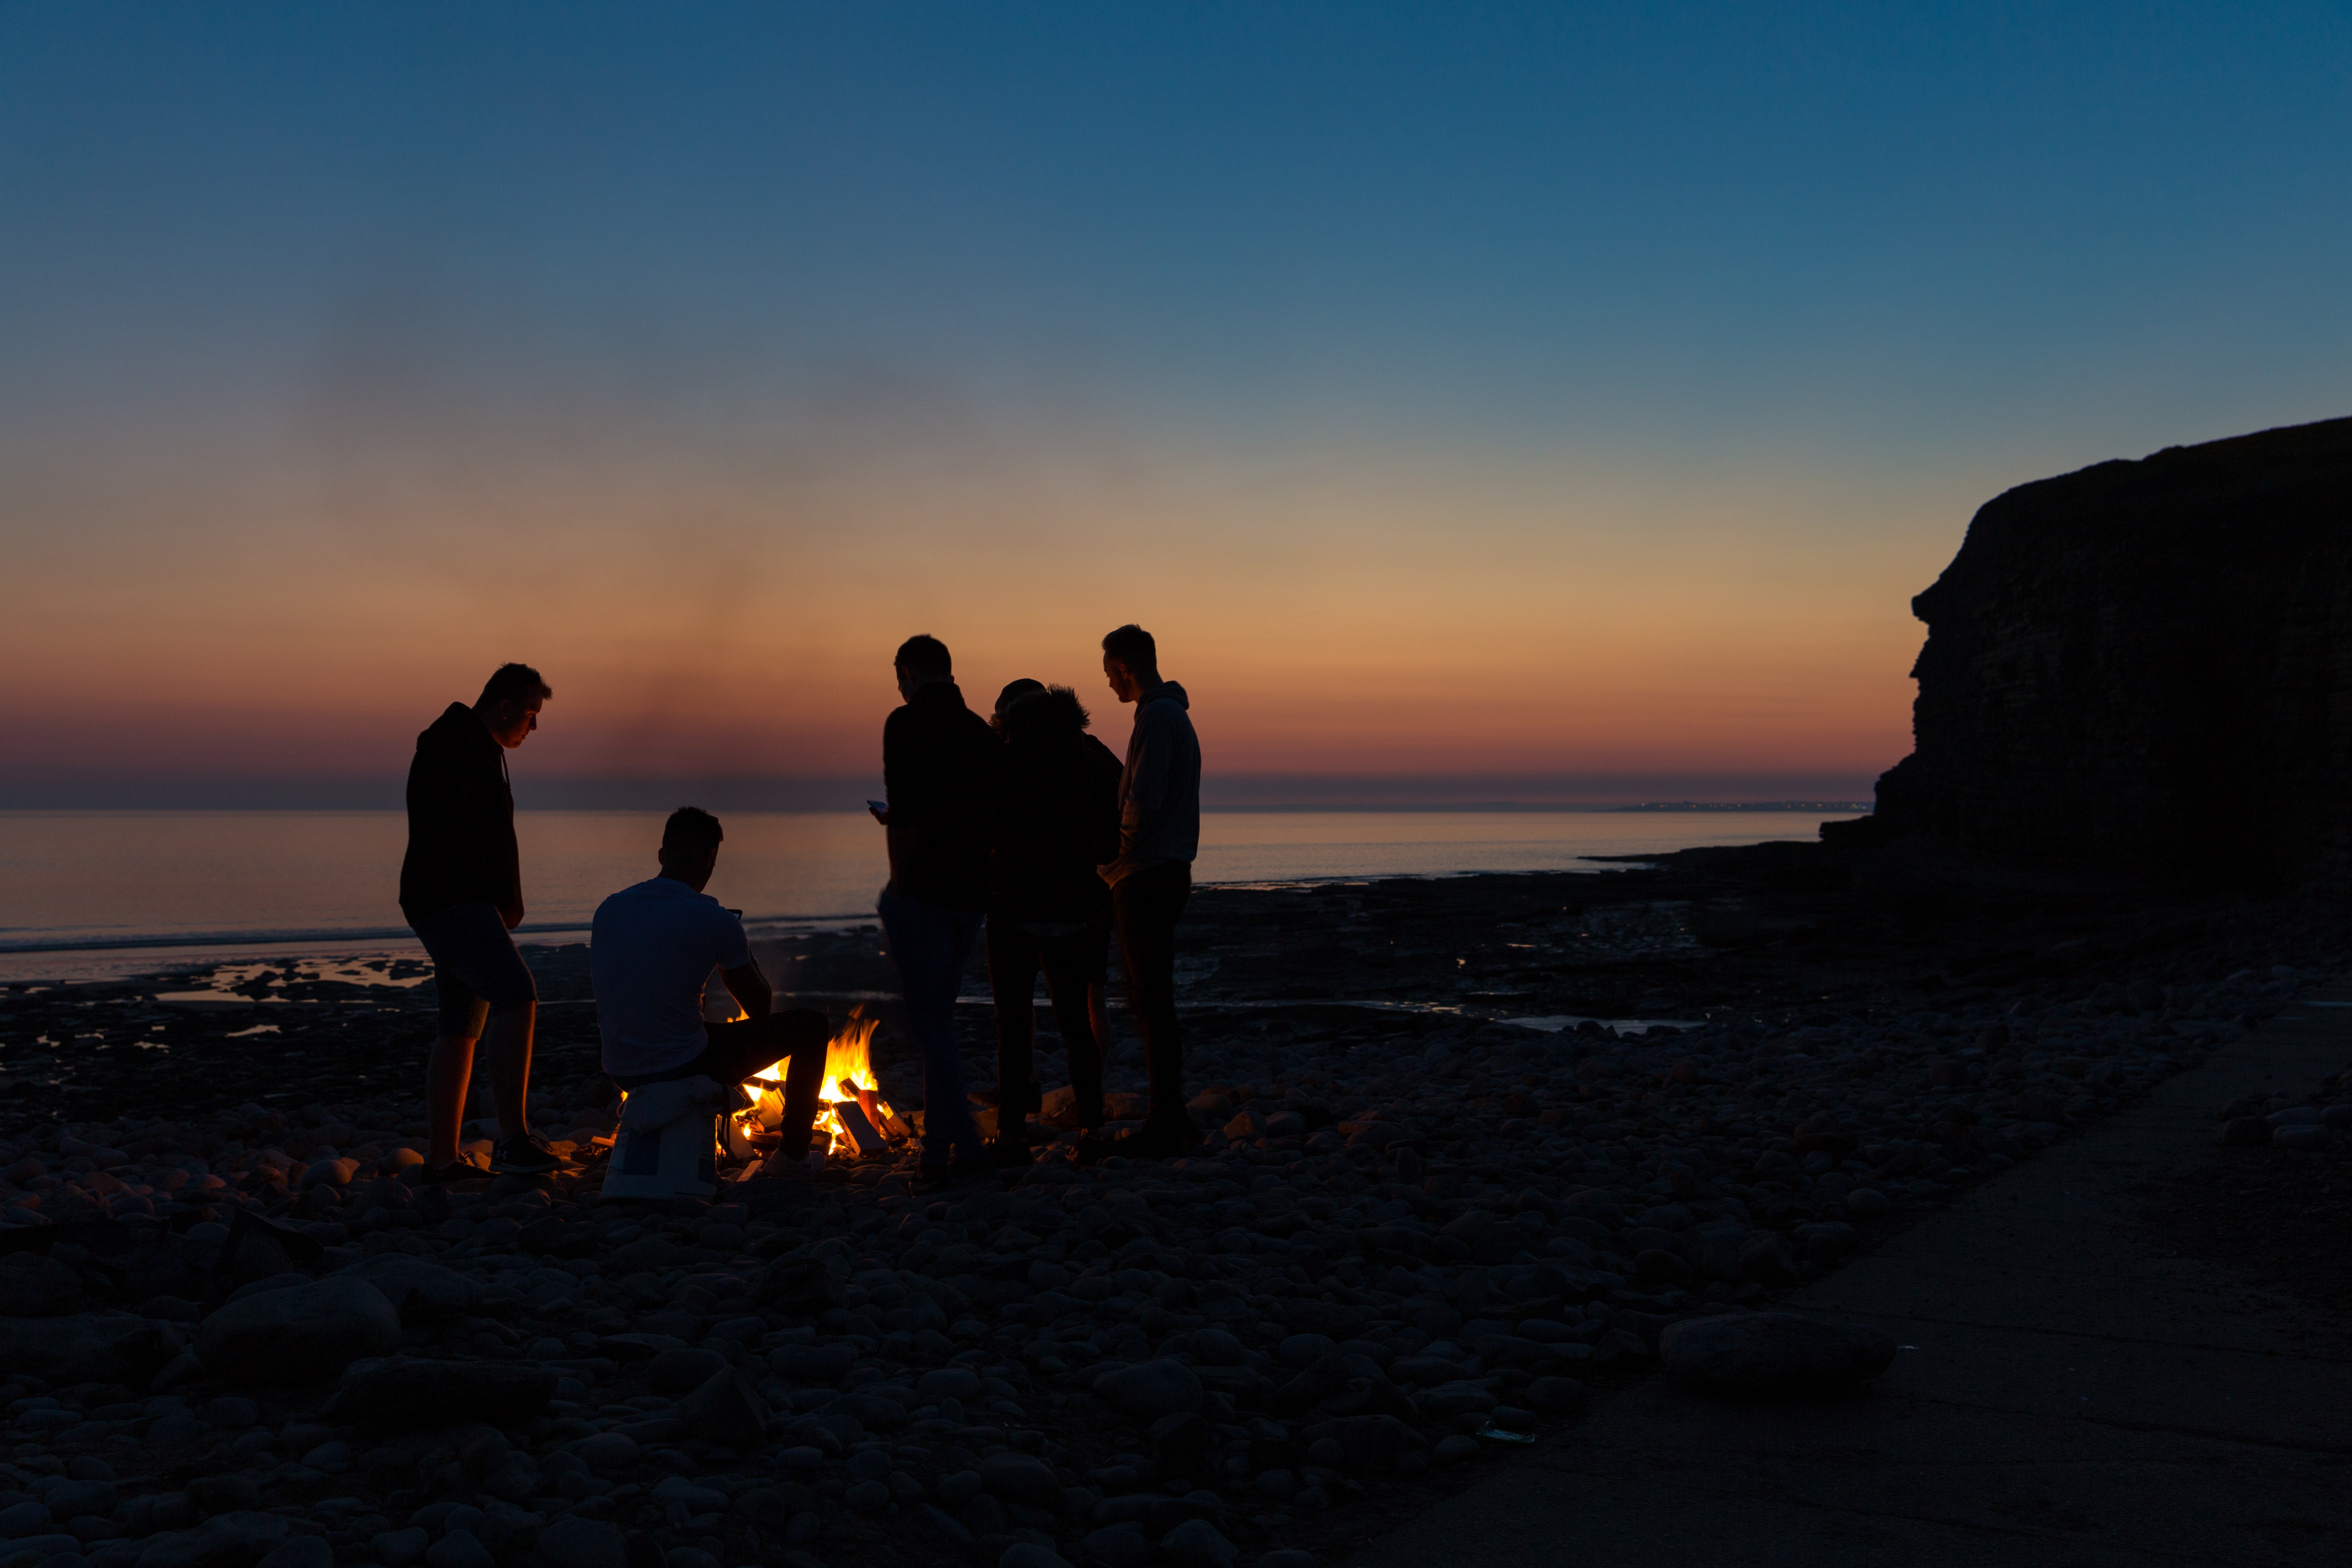 relaxation, campsite, bonfire, beach, dark, silhouettes, rest, camping